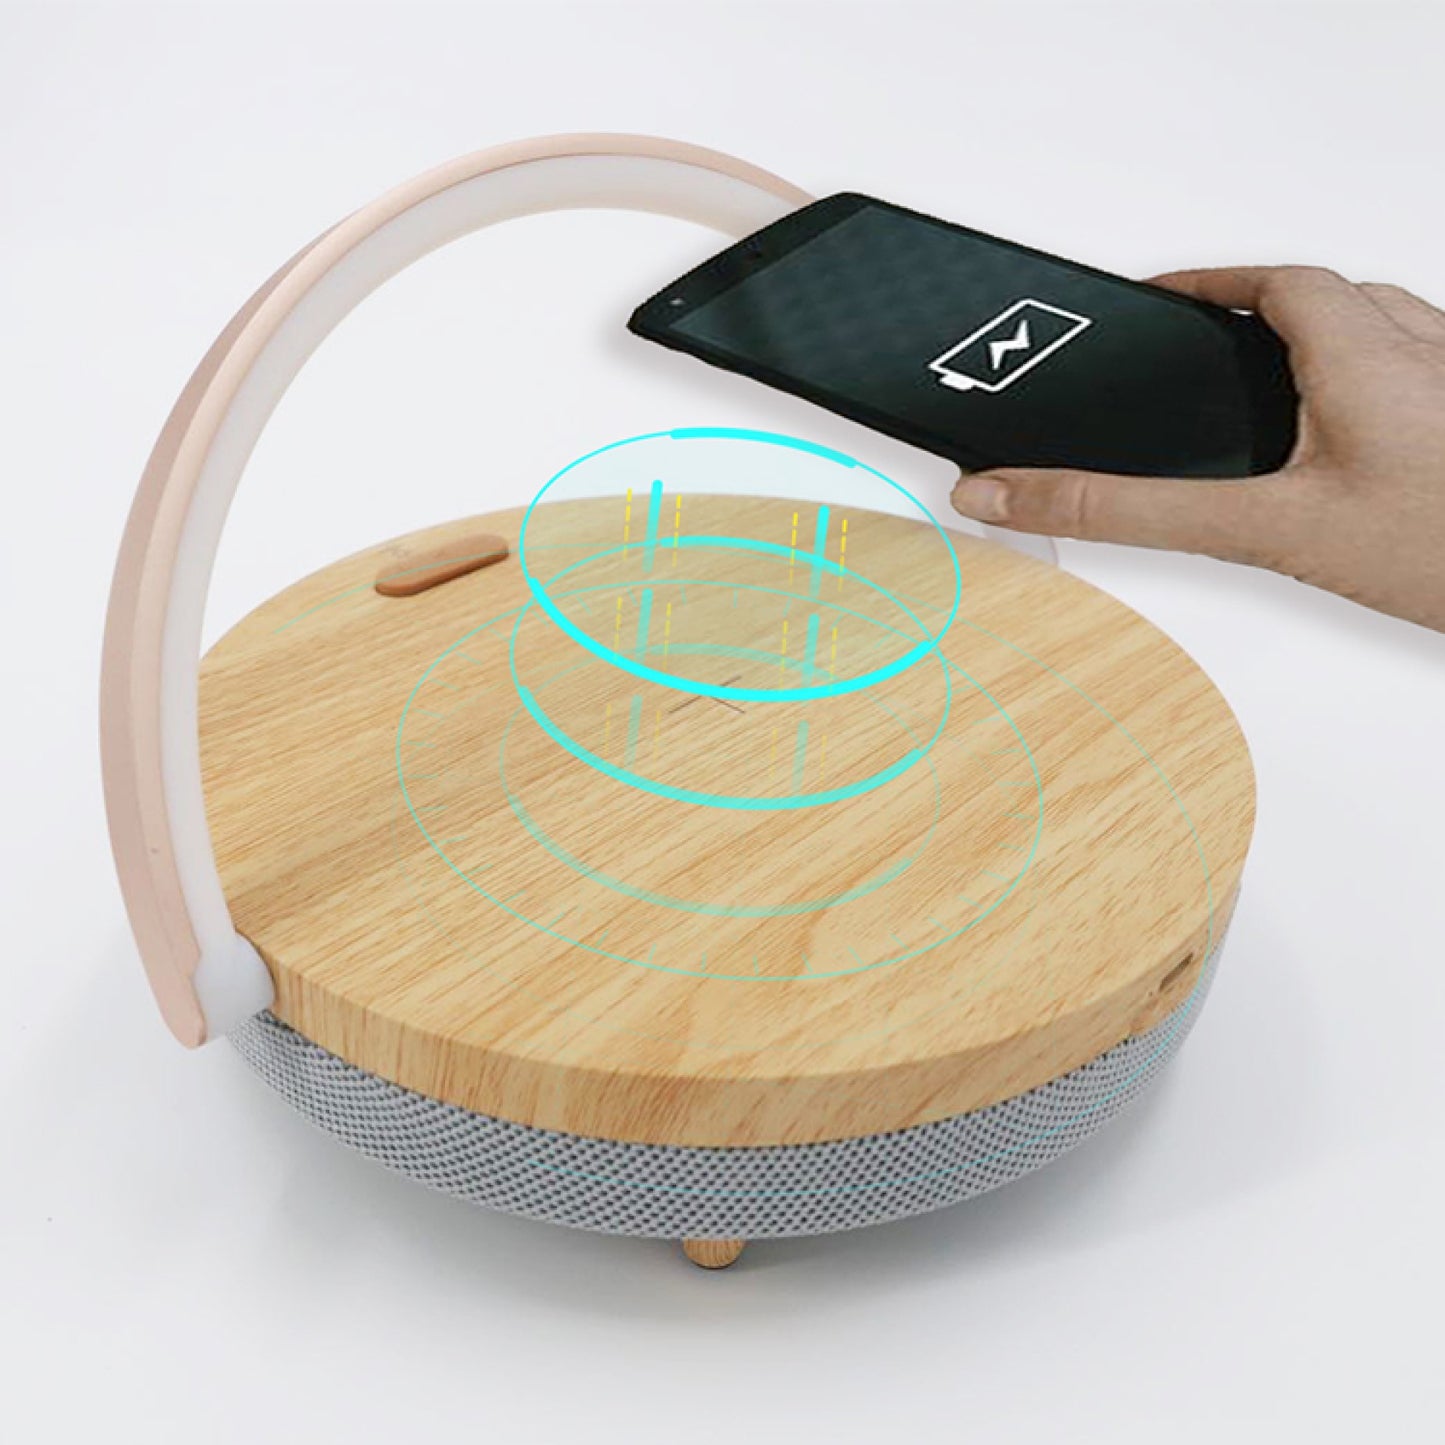 LED Lamp, portable speaker, wireless charger, lamp, 5.0 Bluetooth speaker, smart phone accessories, phone stand, smart products, charging pad, fast charger, charging station